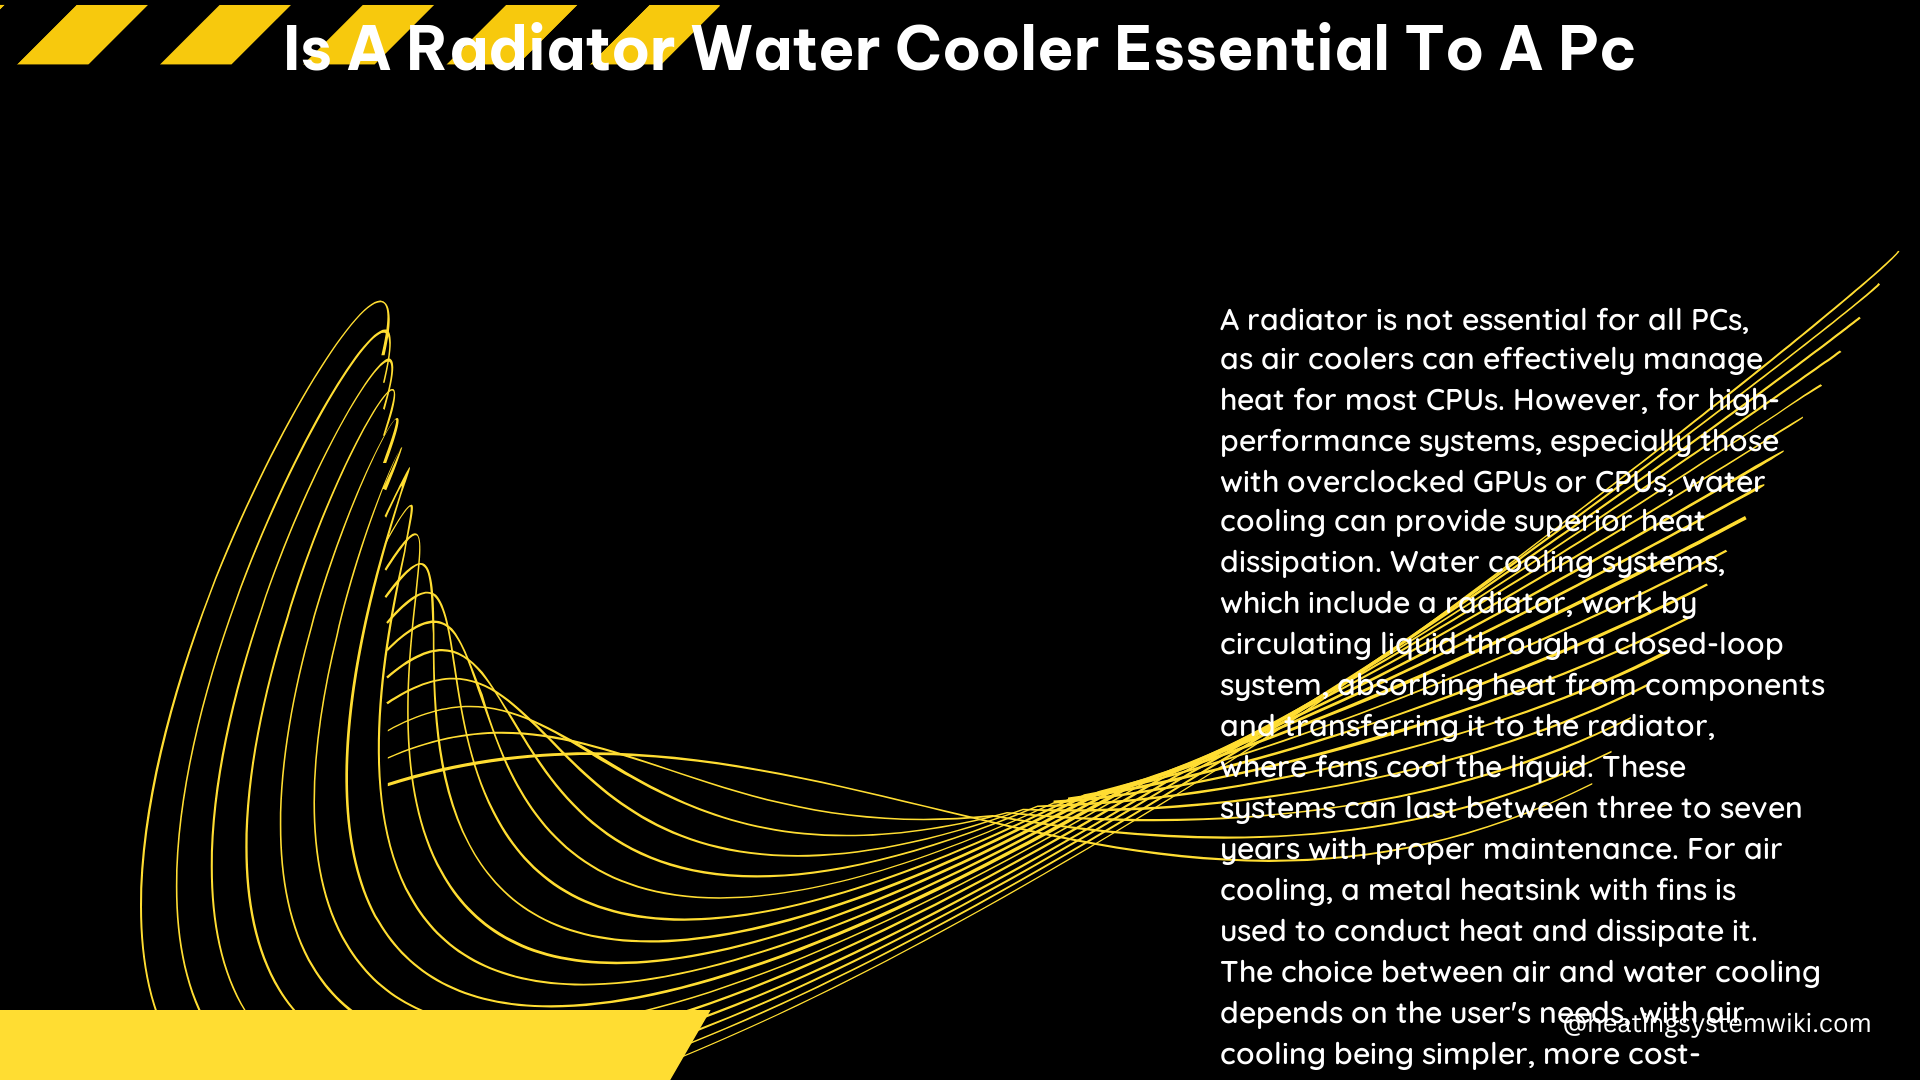 Is a Radiator Water Cooler Essential to a PC